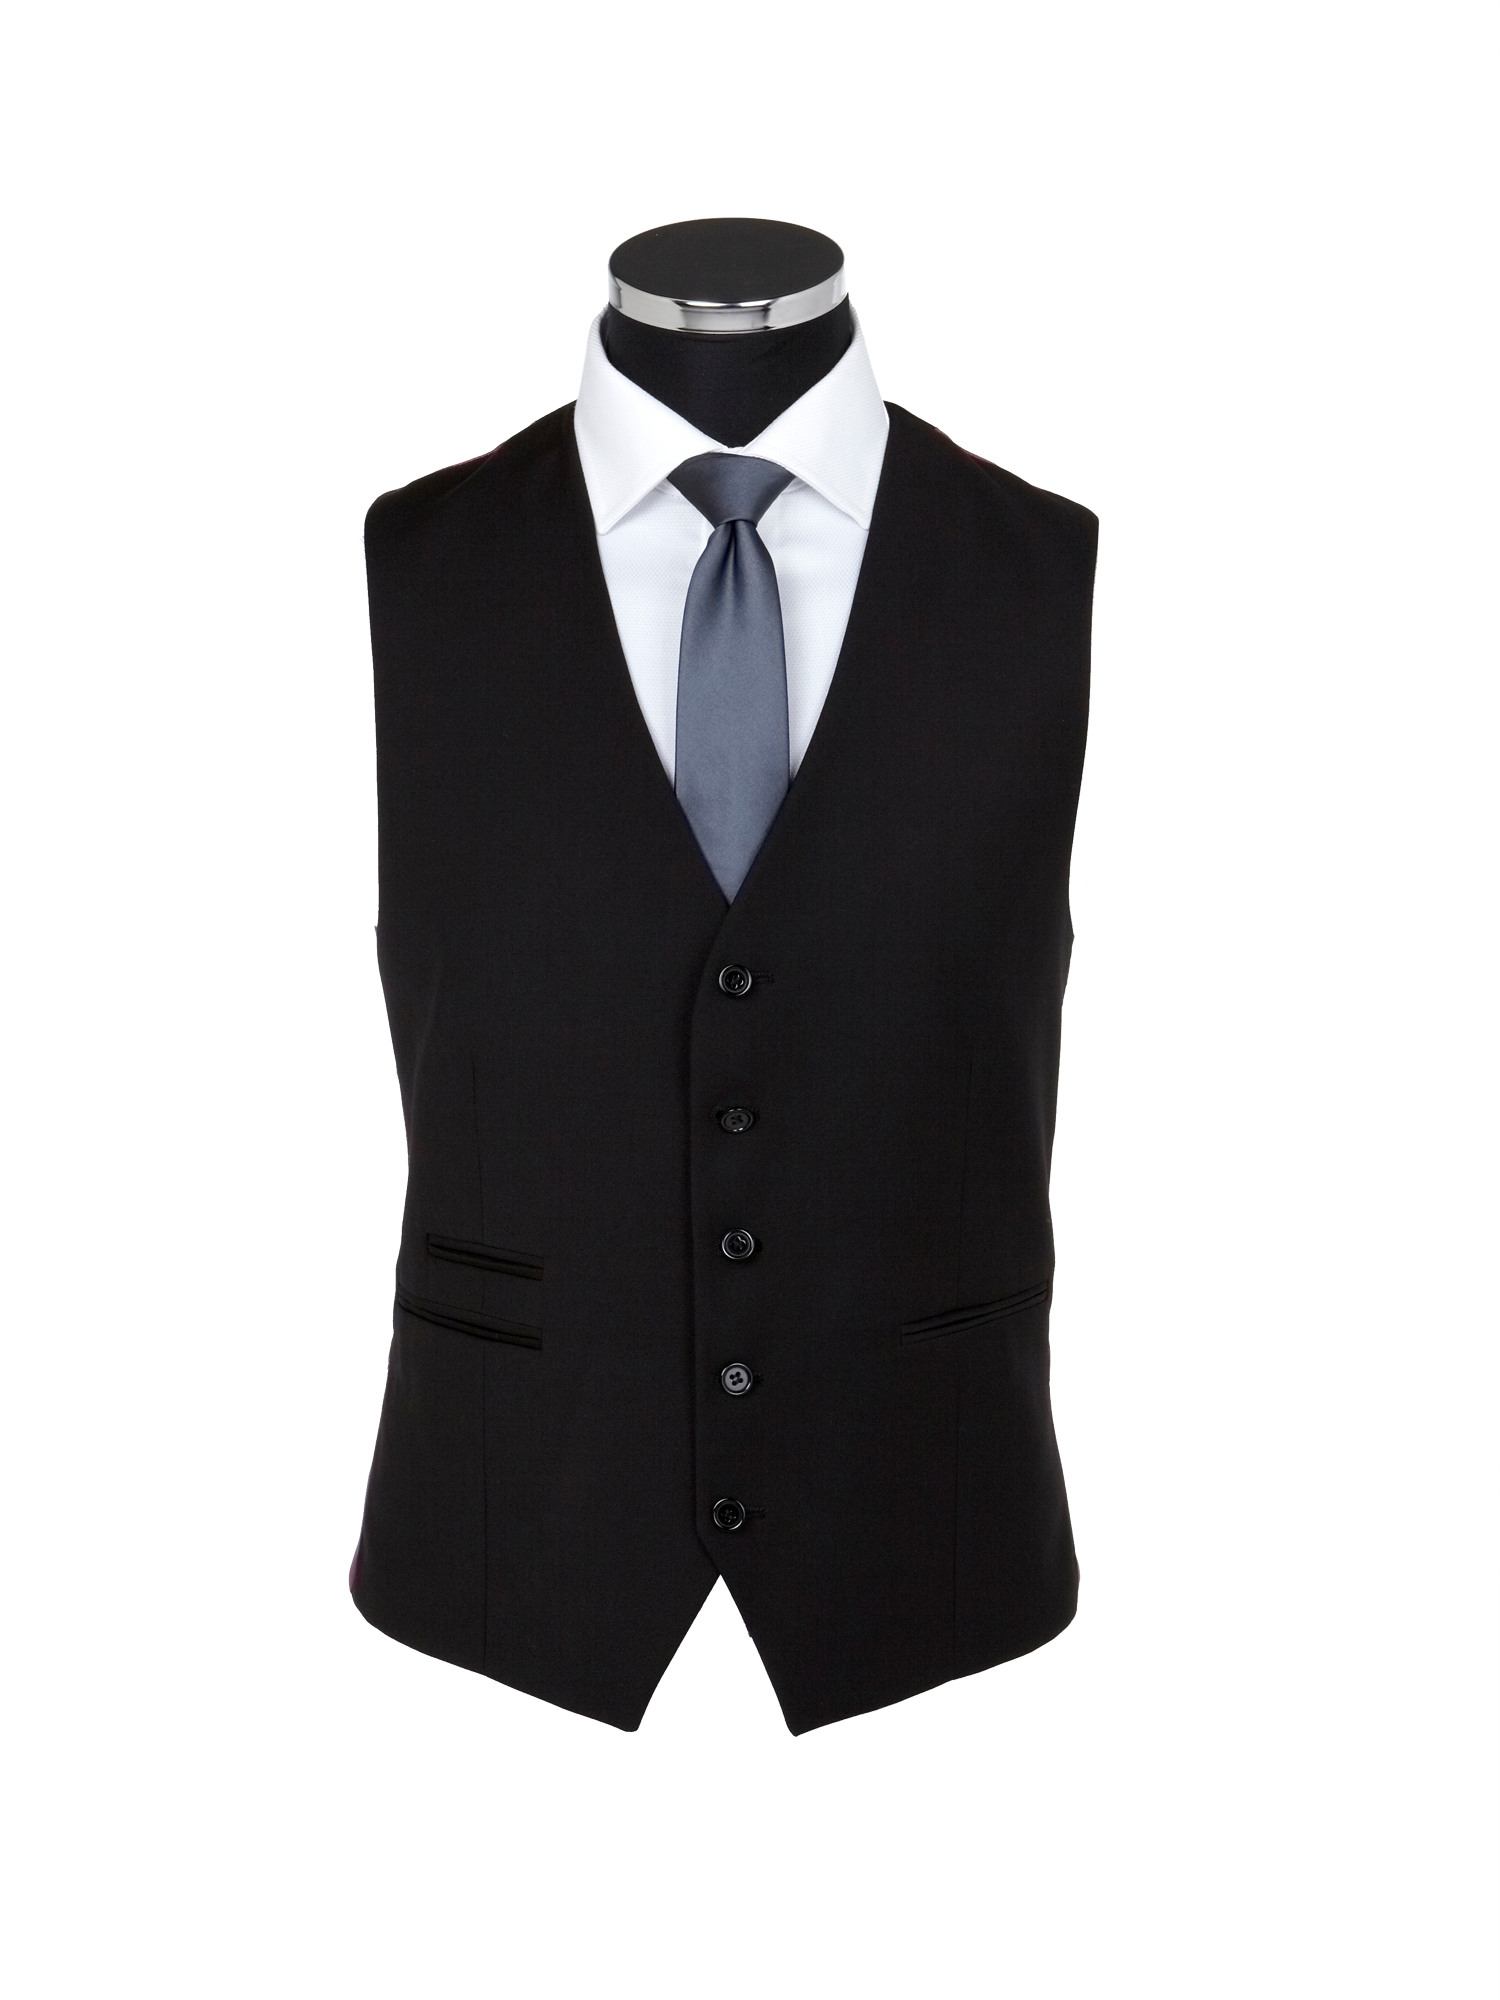 Madrid 3 Piece Black Suit - Tom Murphy's Formal and Menswear